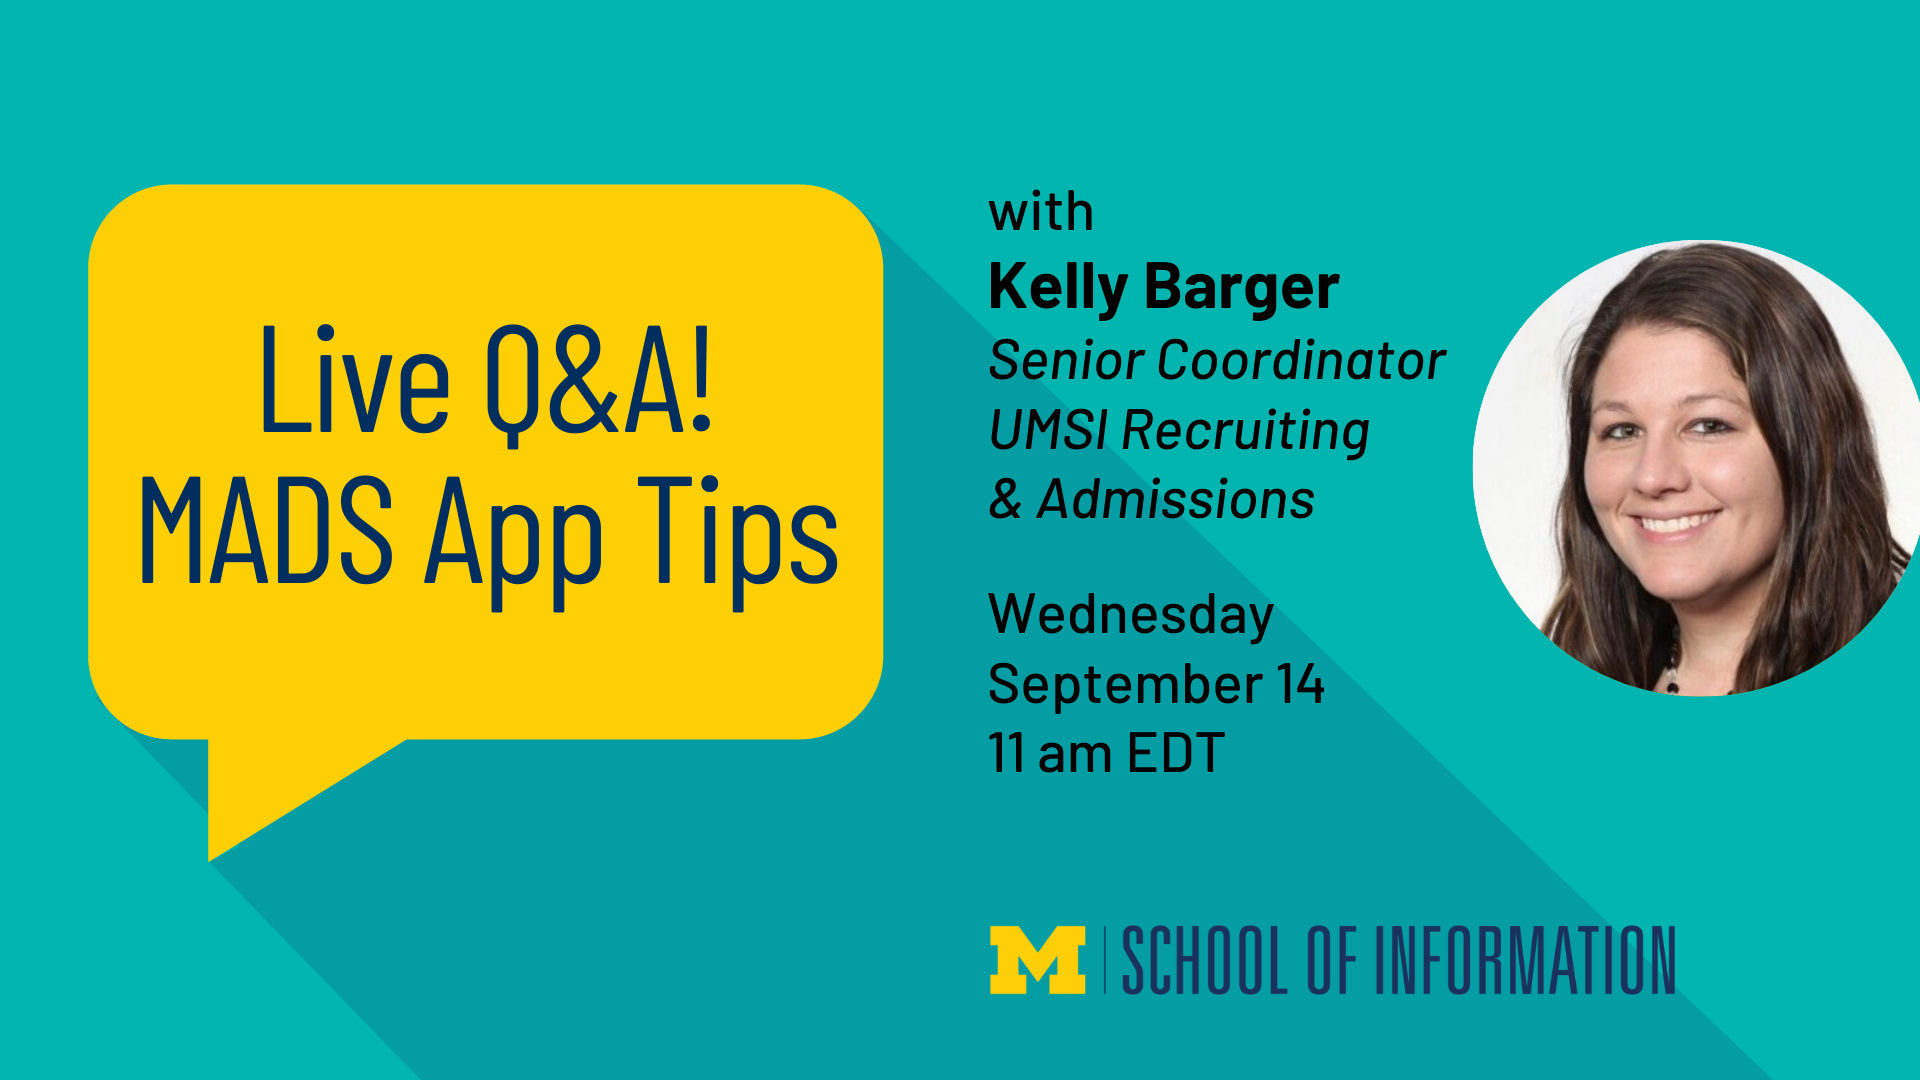 "Live Q&A! MADS App Tips with Kelly Barger, Senior Coordinator, UMSI Recruiting & Admissions. Wednesday, September 14. 11 am EDT."